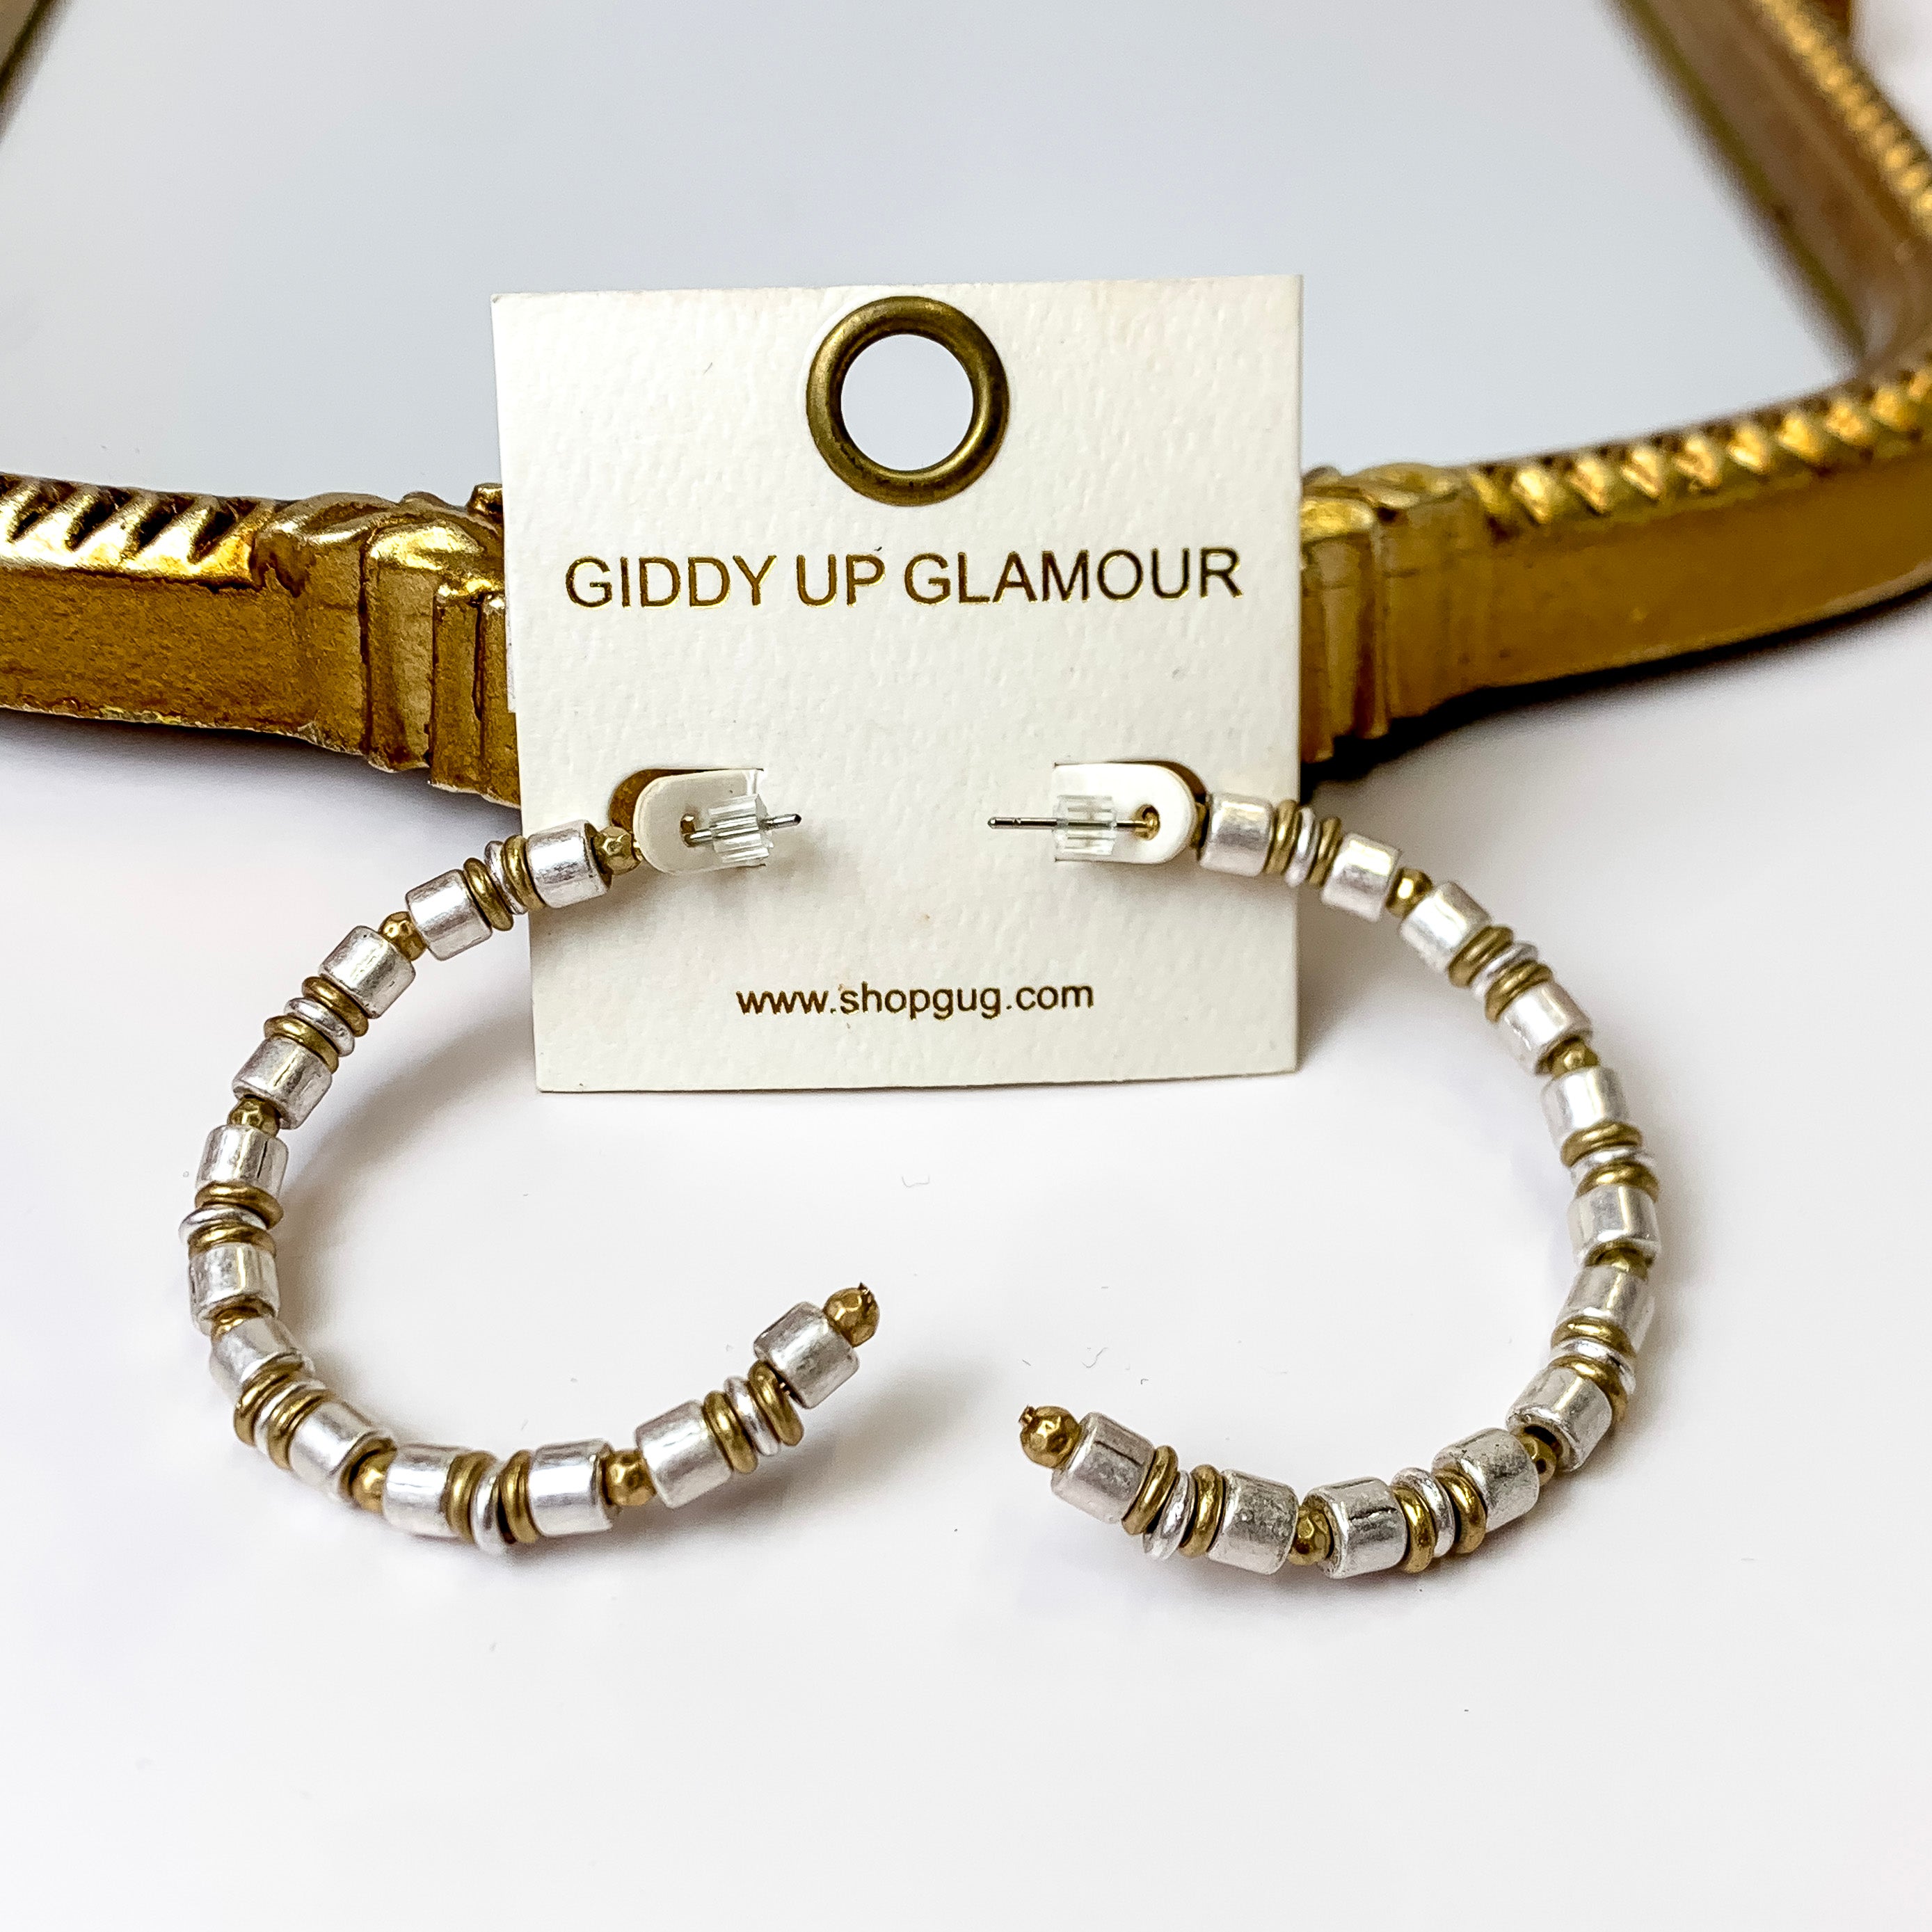 Beaded Hoop Earrings in Silver and Gold - Giddy Up Glamour Boutique